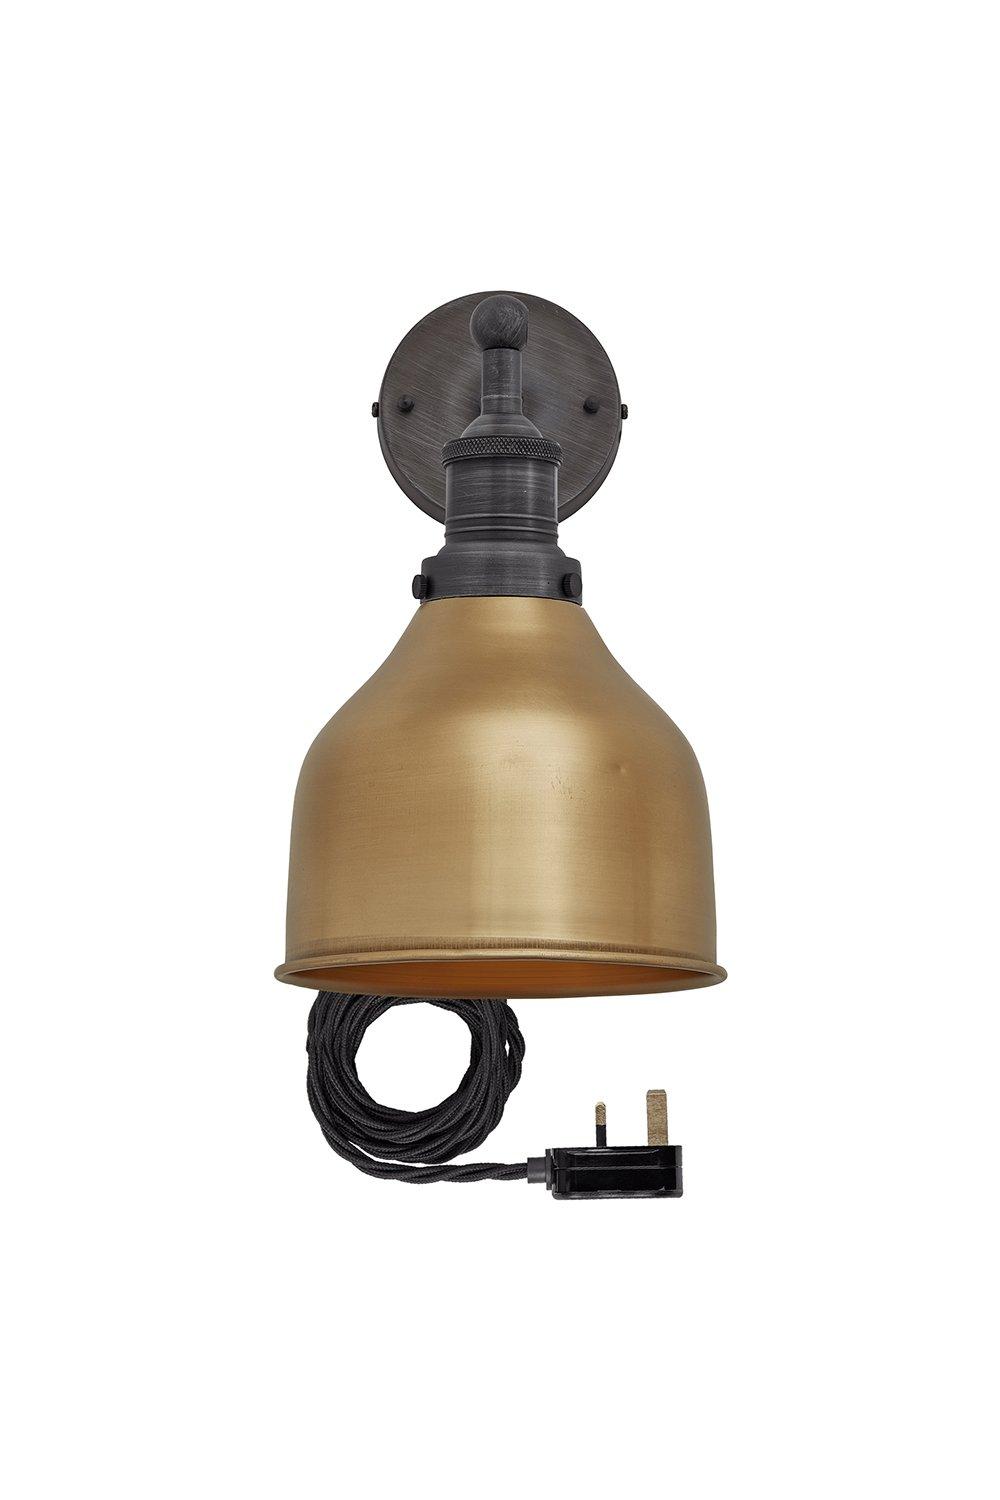 Brooklyn Cone Wall Light, 7 Inch, Brass, Pewter Holder With Plug